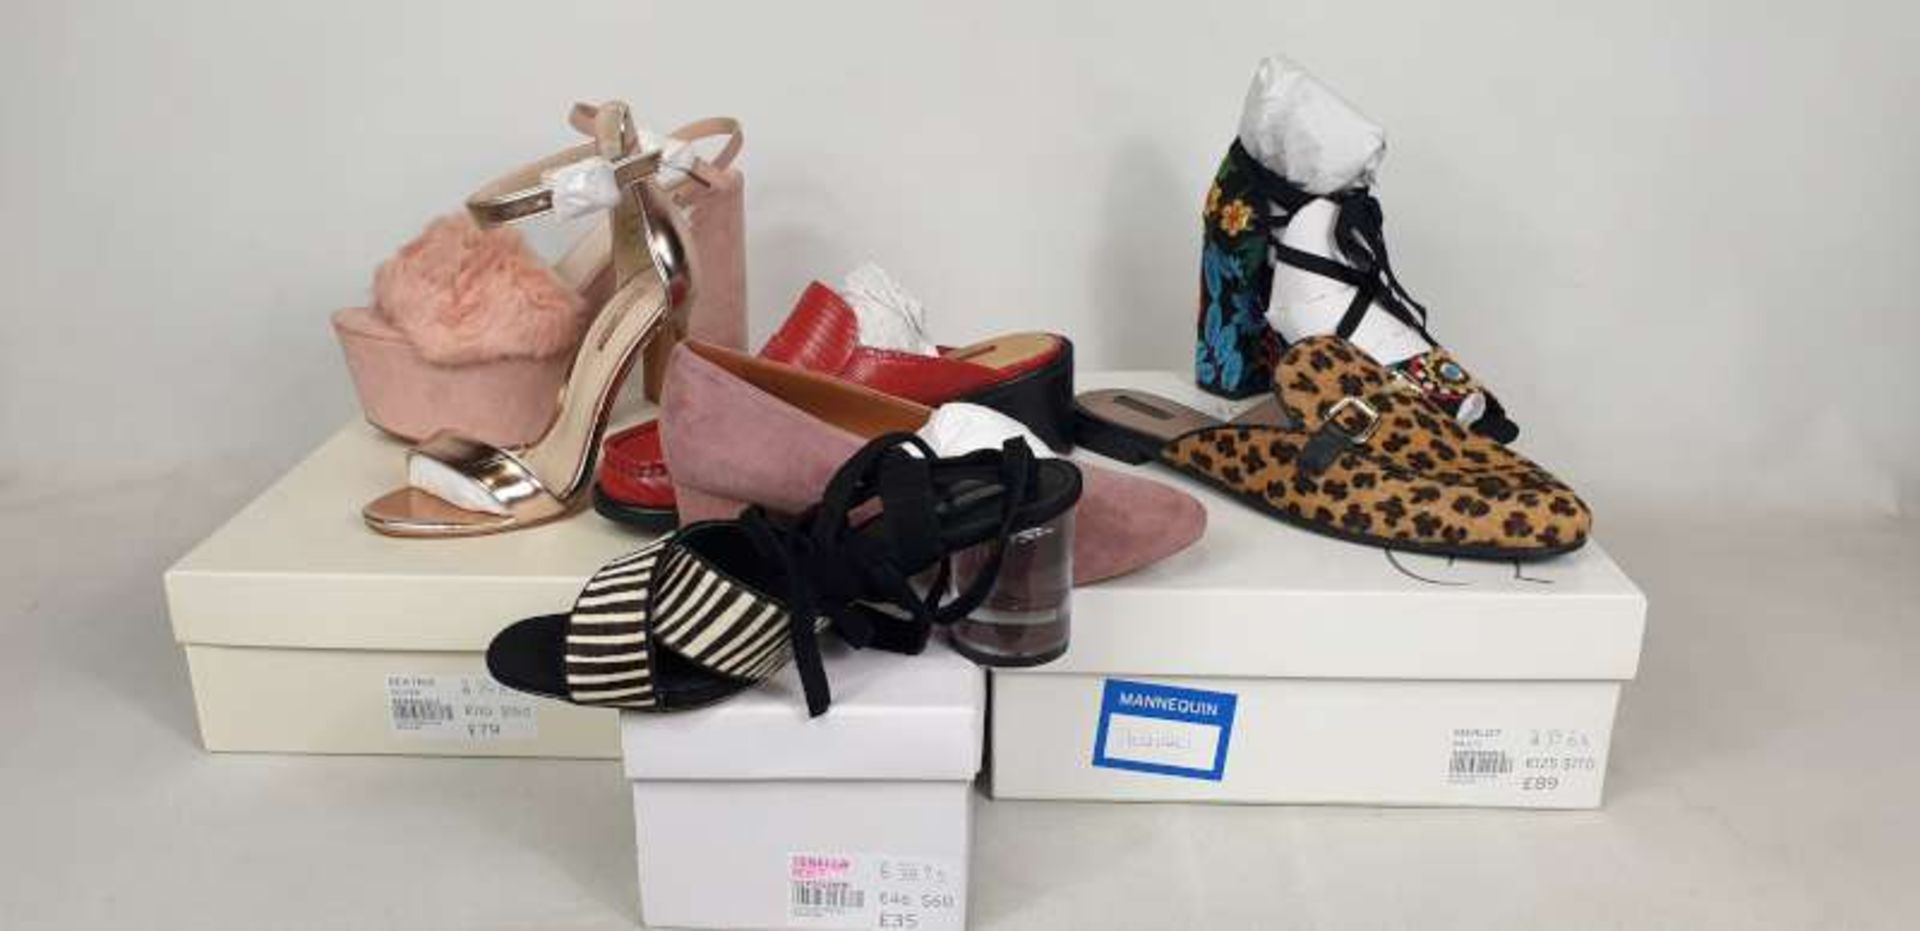 10 X BOXED TOP SHOP SHOES IN VARIOUS STYLES AND SIZES